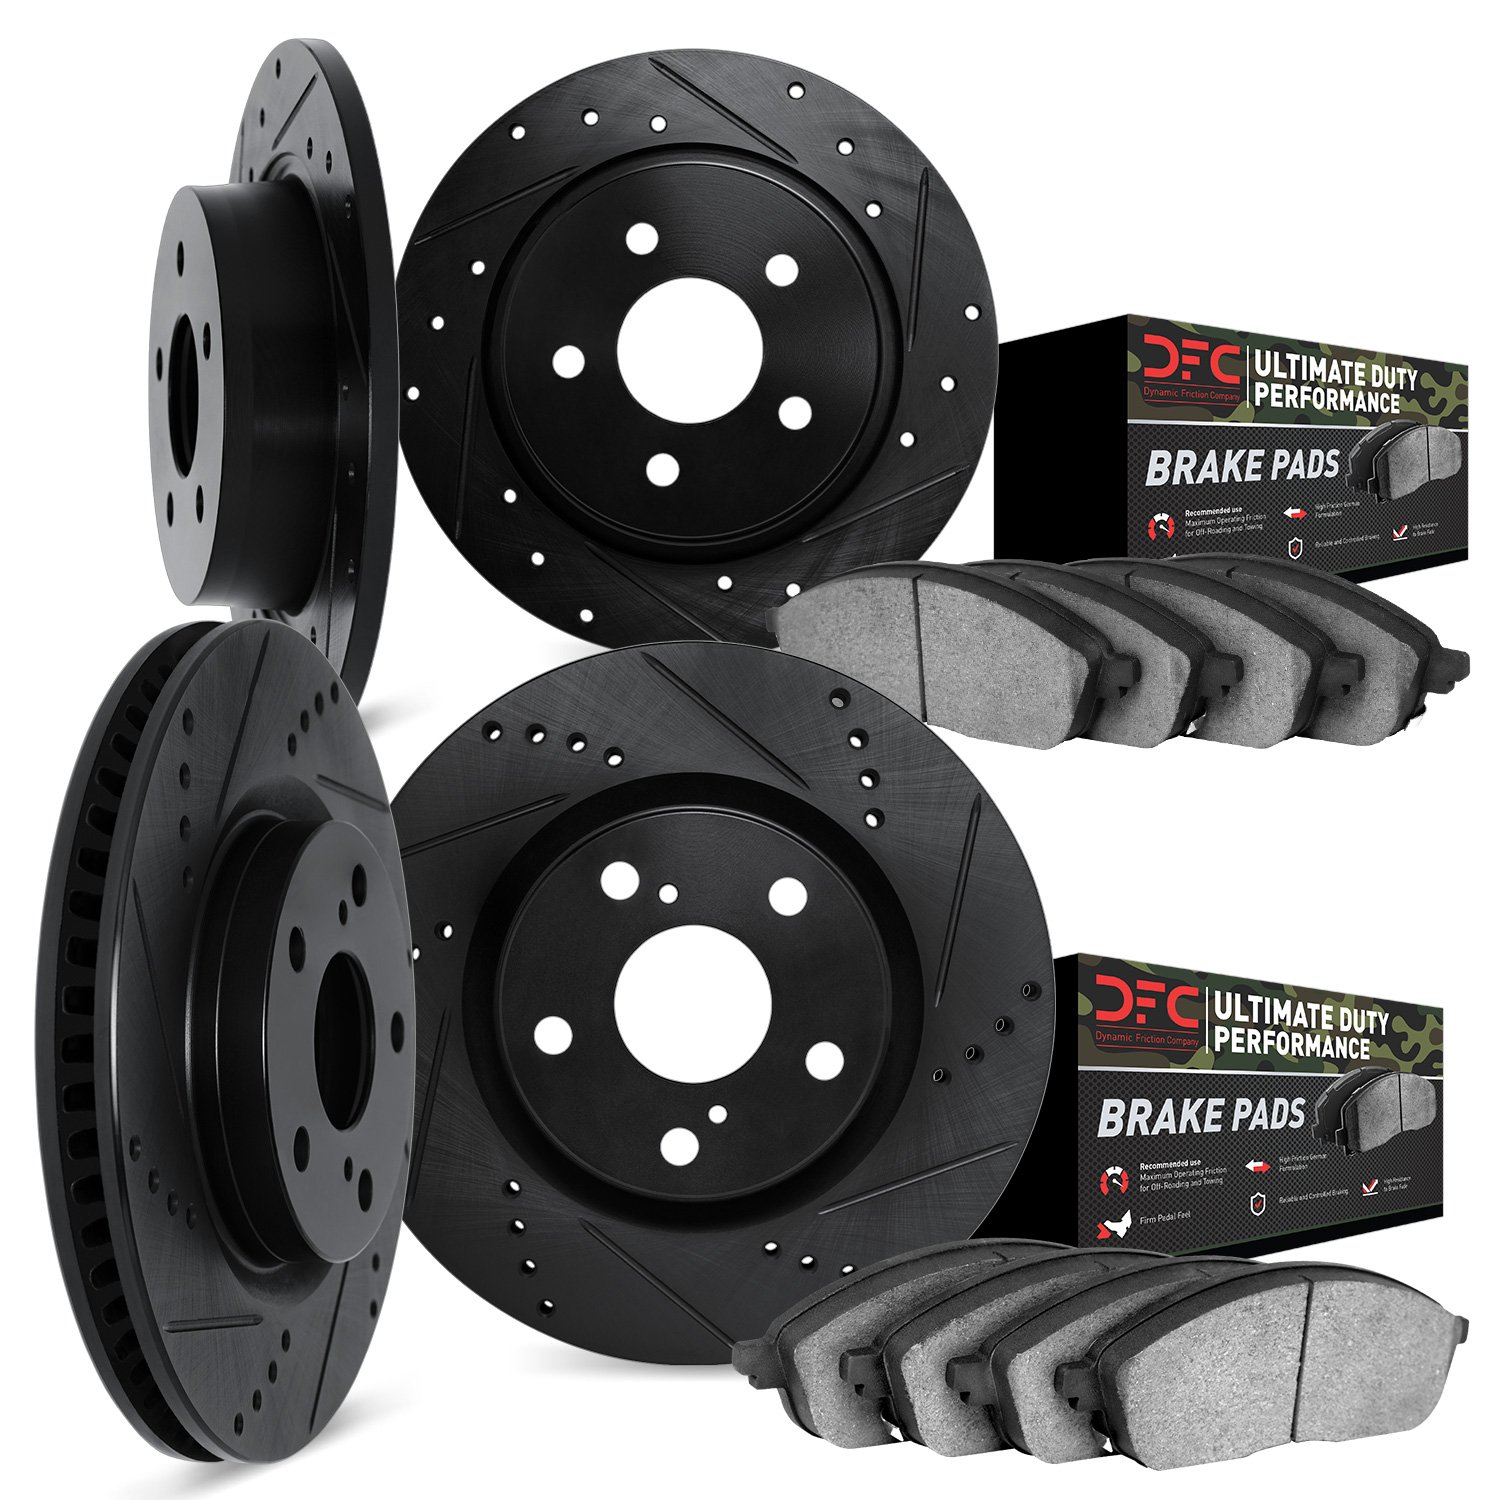 8404-42009 Drilled/Slotted Brake Rotors with Ultimate-Duty Brake Pads Kit [Black], 2007-2012 Mopar, Position: Front and Rear